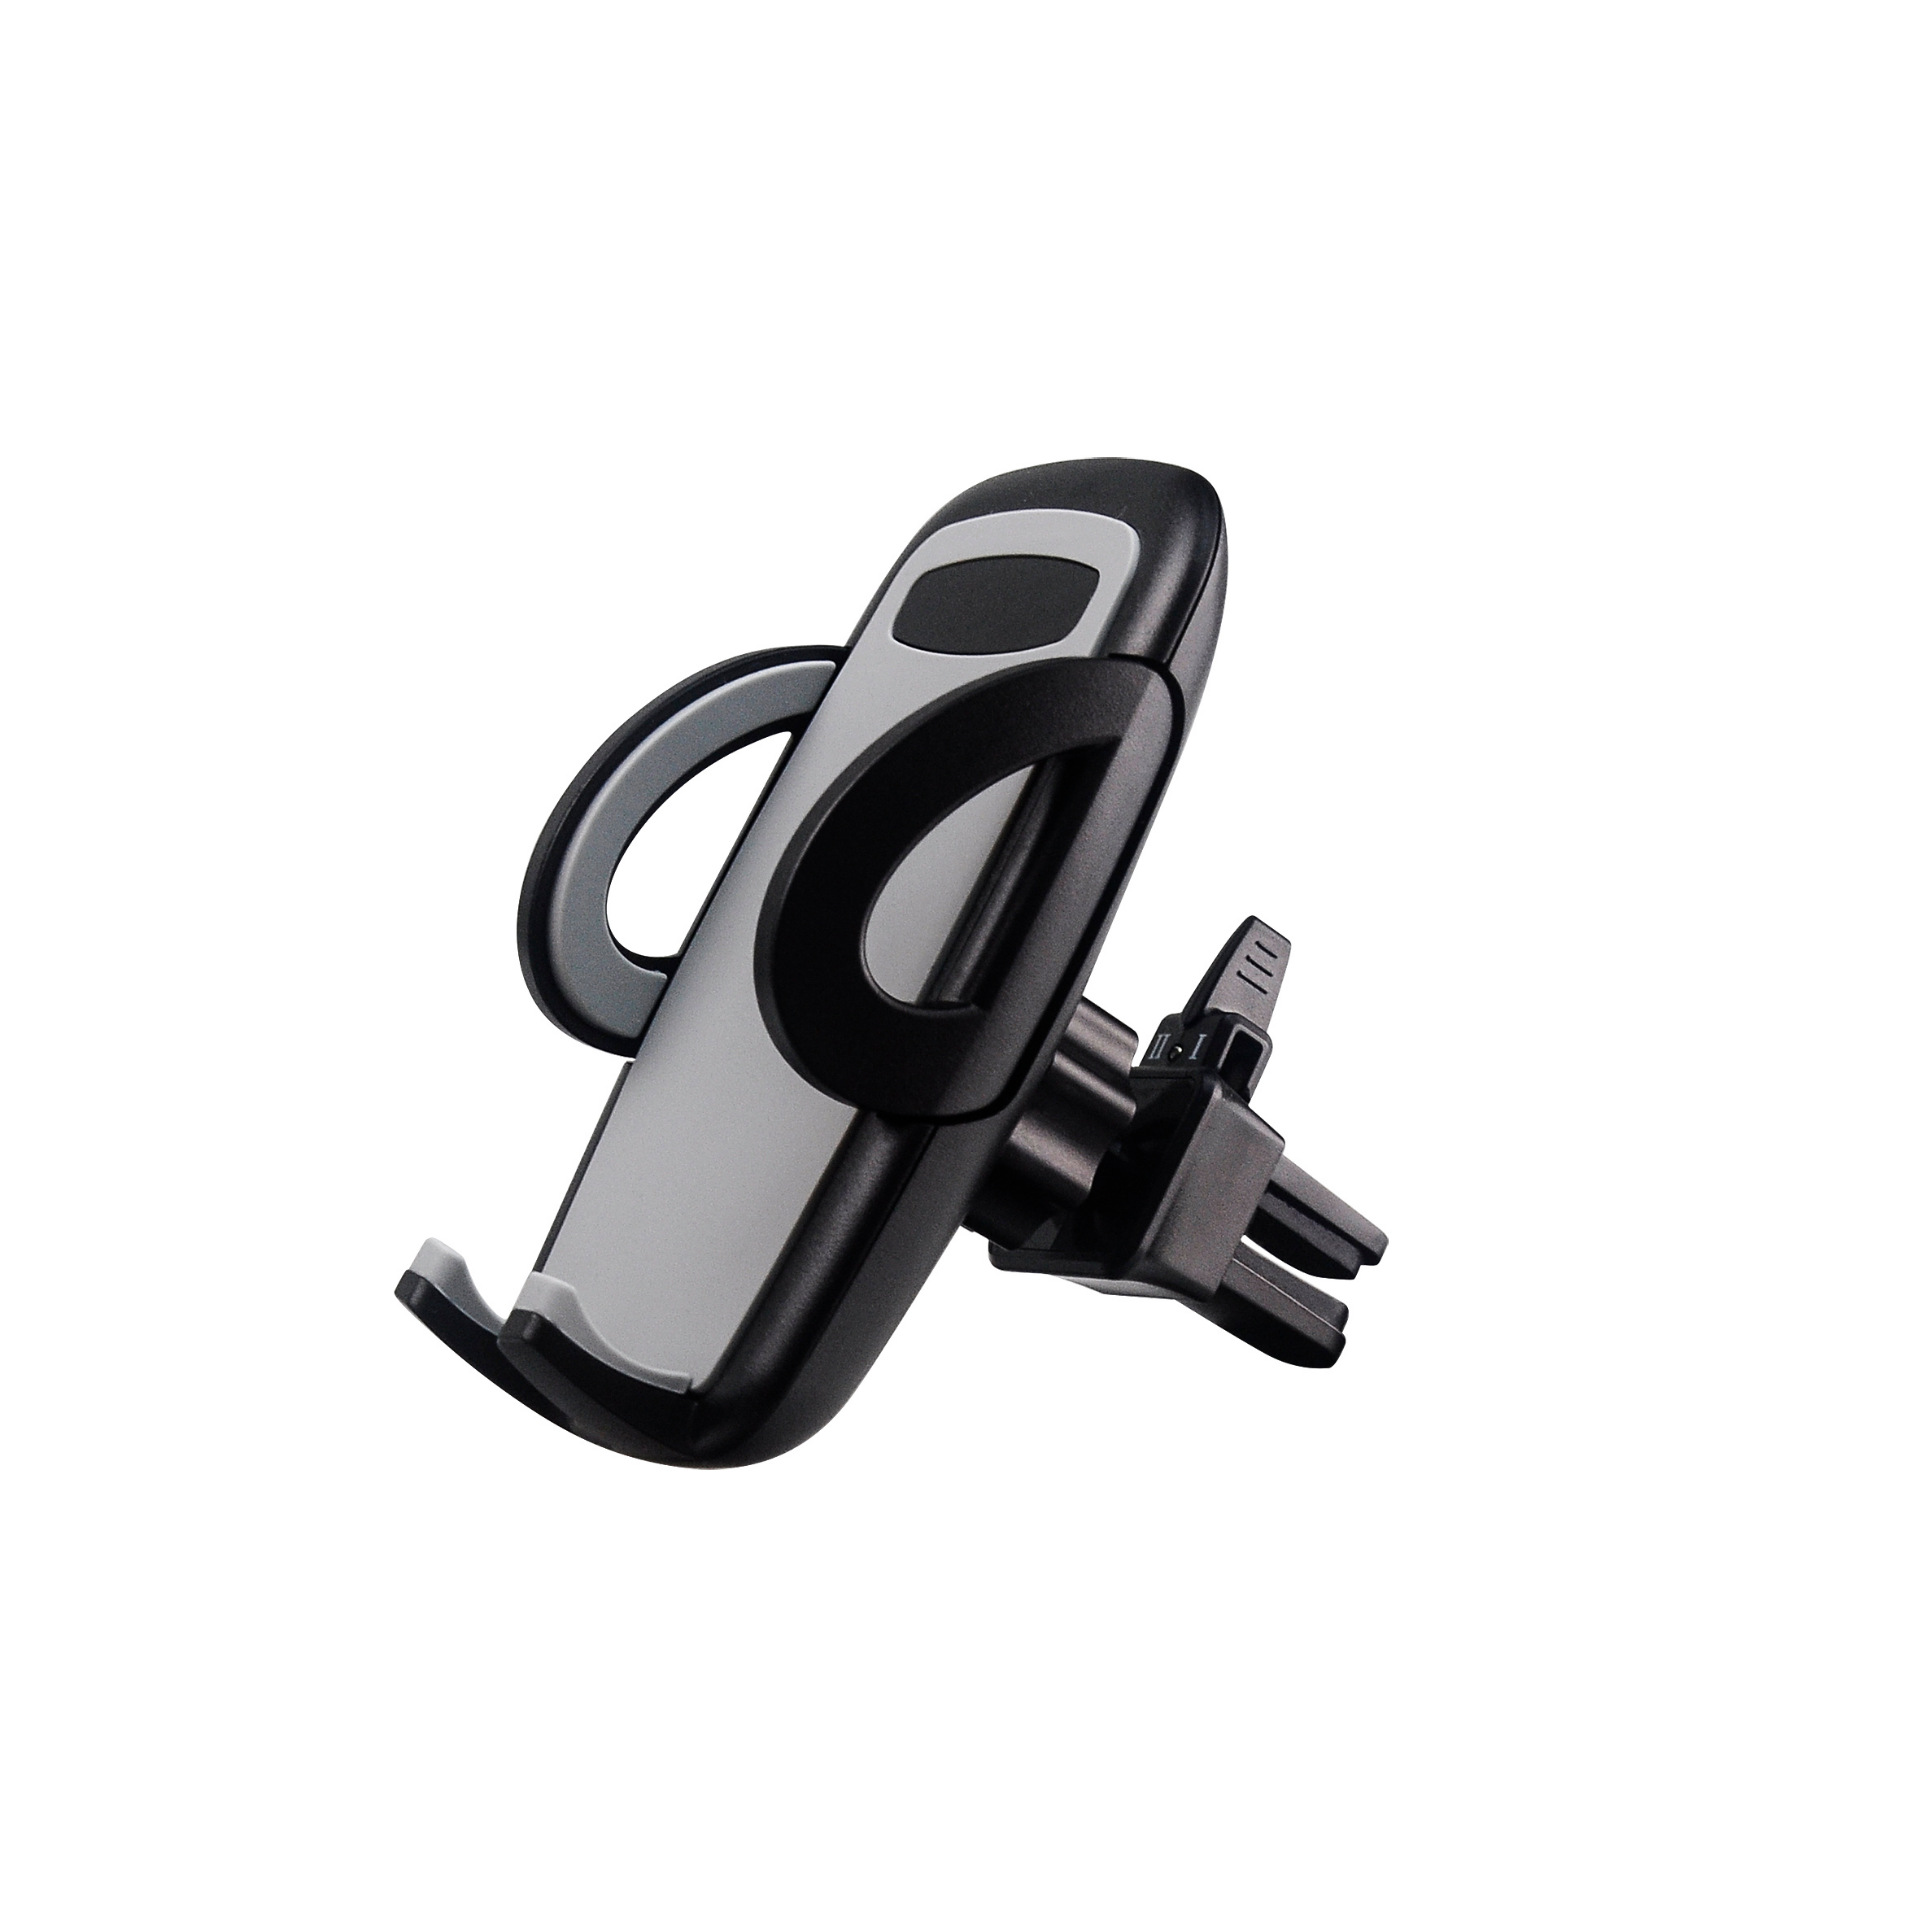 Universal Phone Holder for Car Air Vent Car Phone Holder Mount Compatible with All Mobile Phones